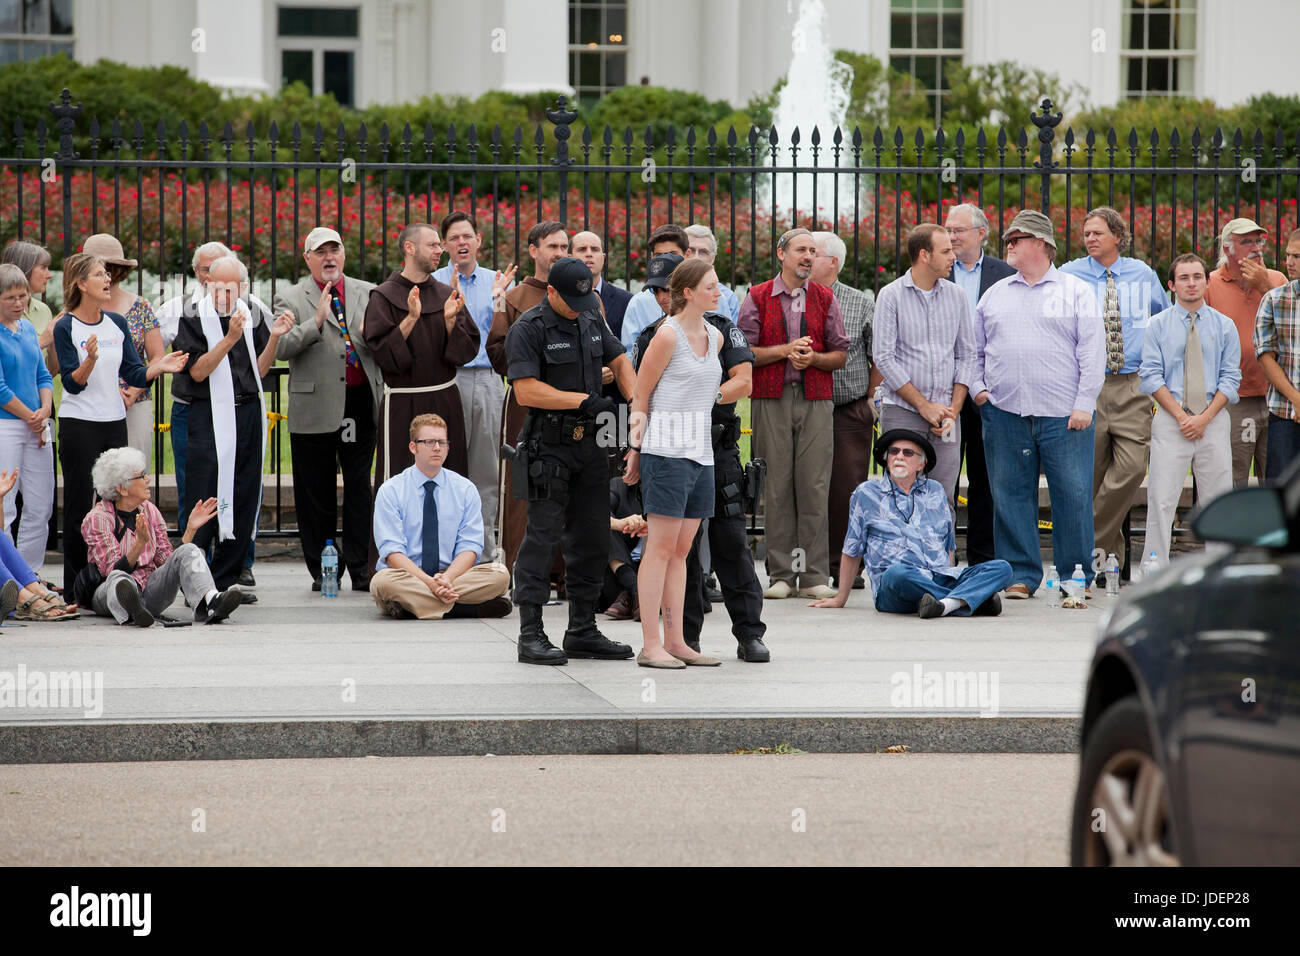 Female environmental activists and protesters arrested for civil disobedience in front of White House (woman arrested, detained) - Washington, DC USA Stock Photo